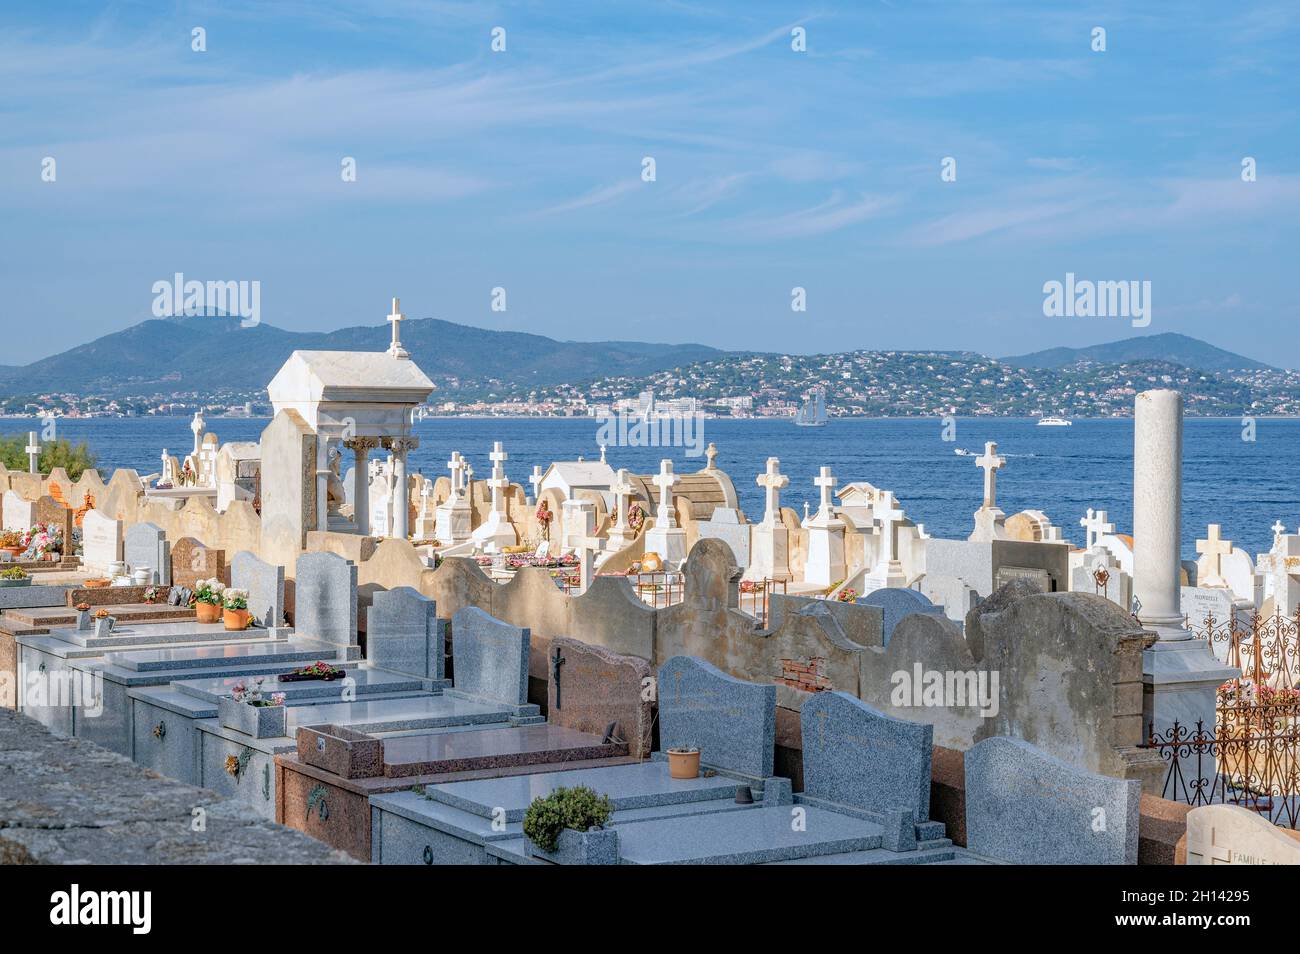 The seafarer's cemetery at Saint-Tropez, France, is the burial ground of film director Roger Vadim. Stock Photo